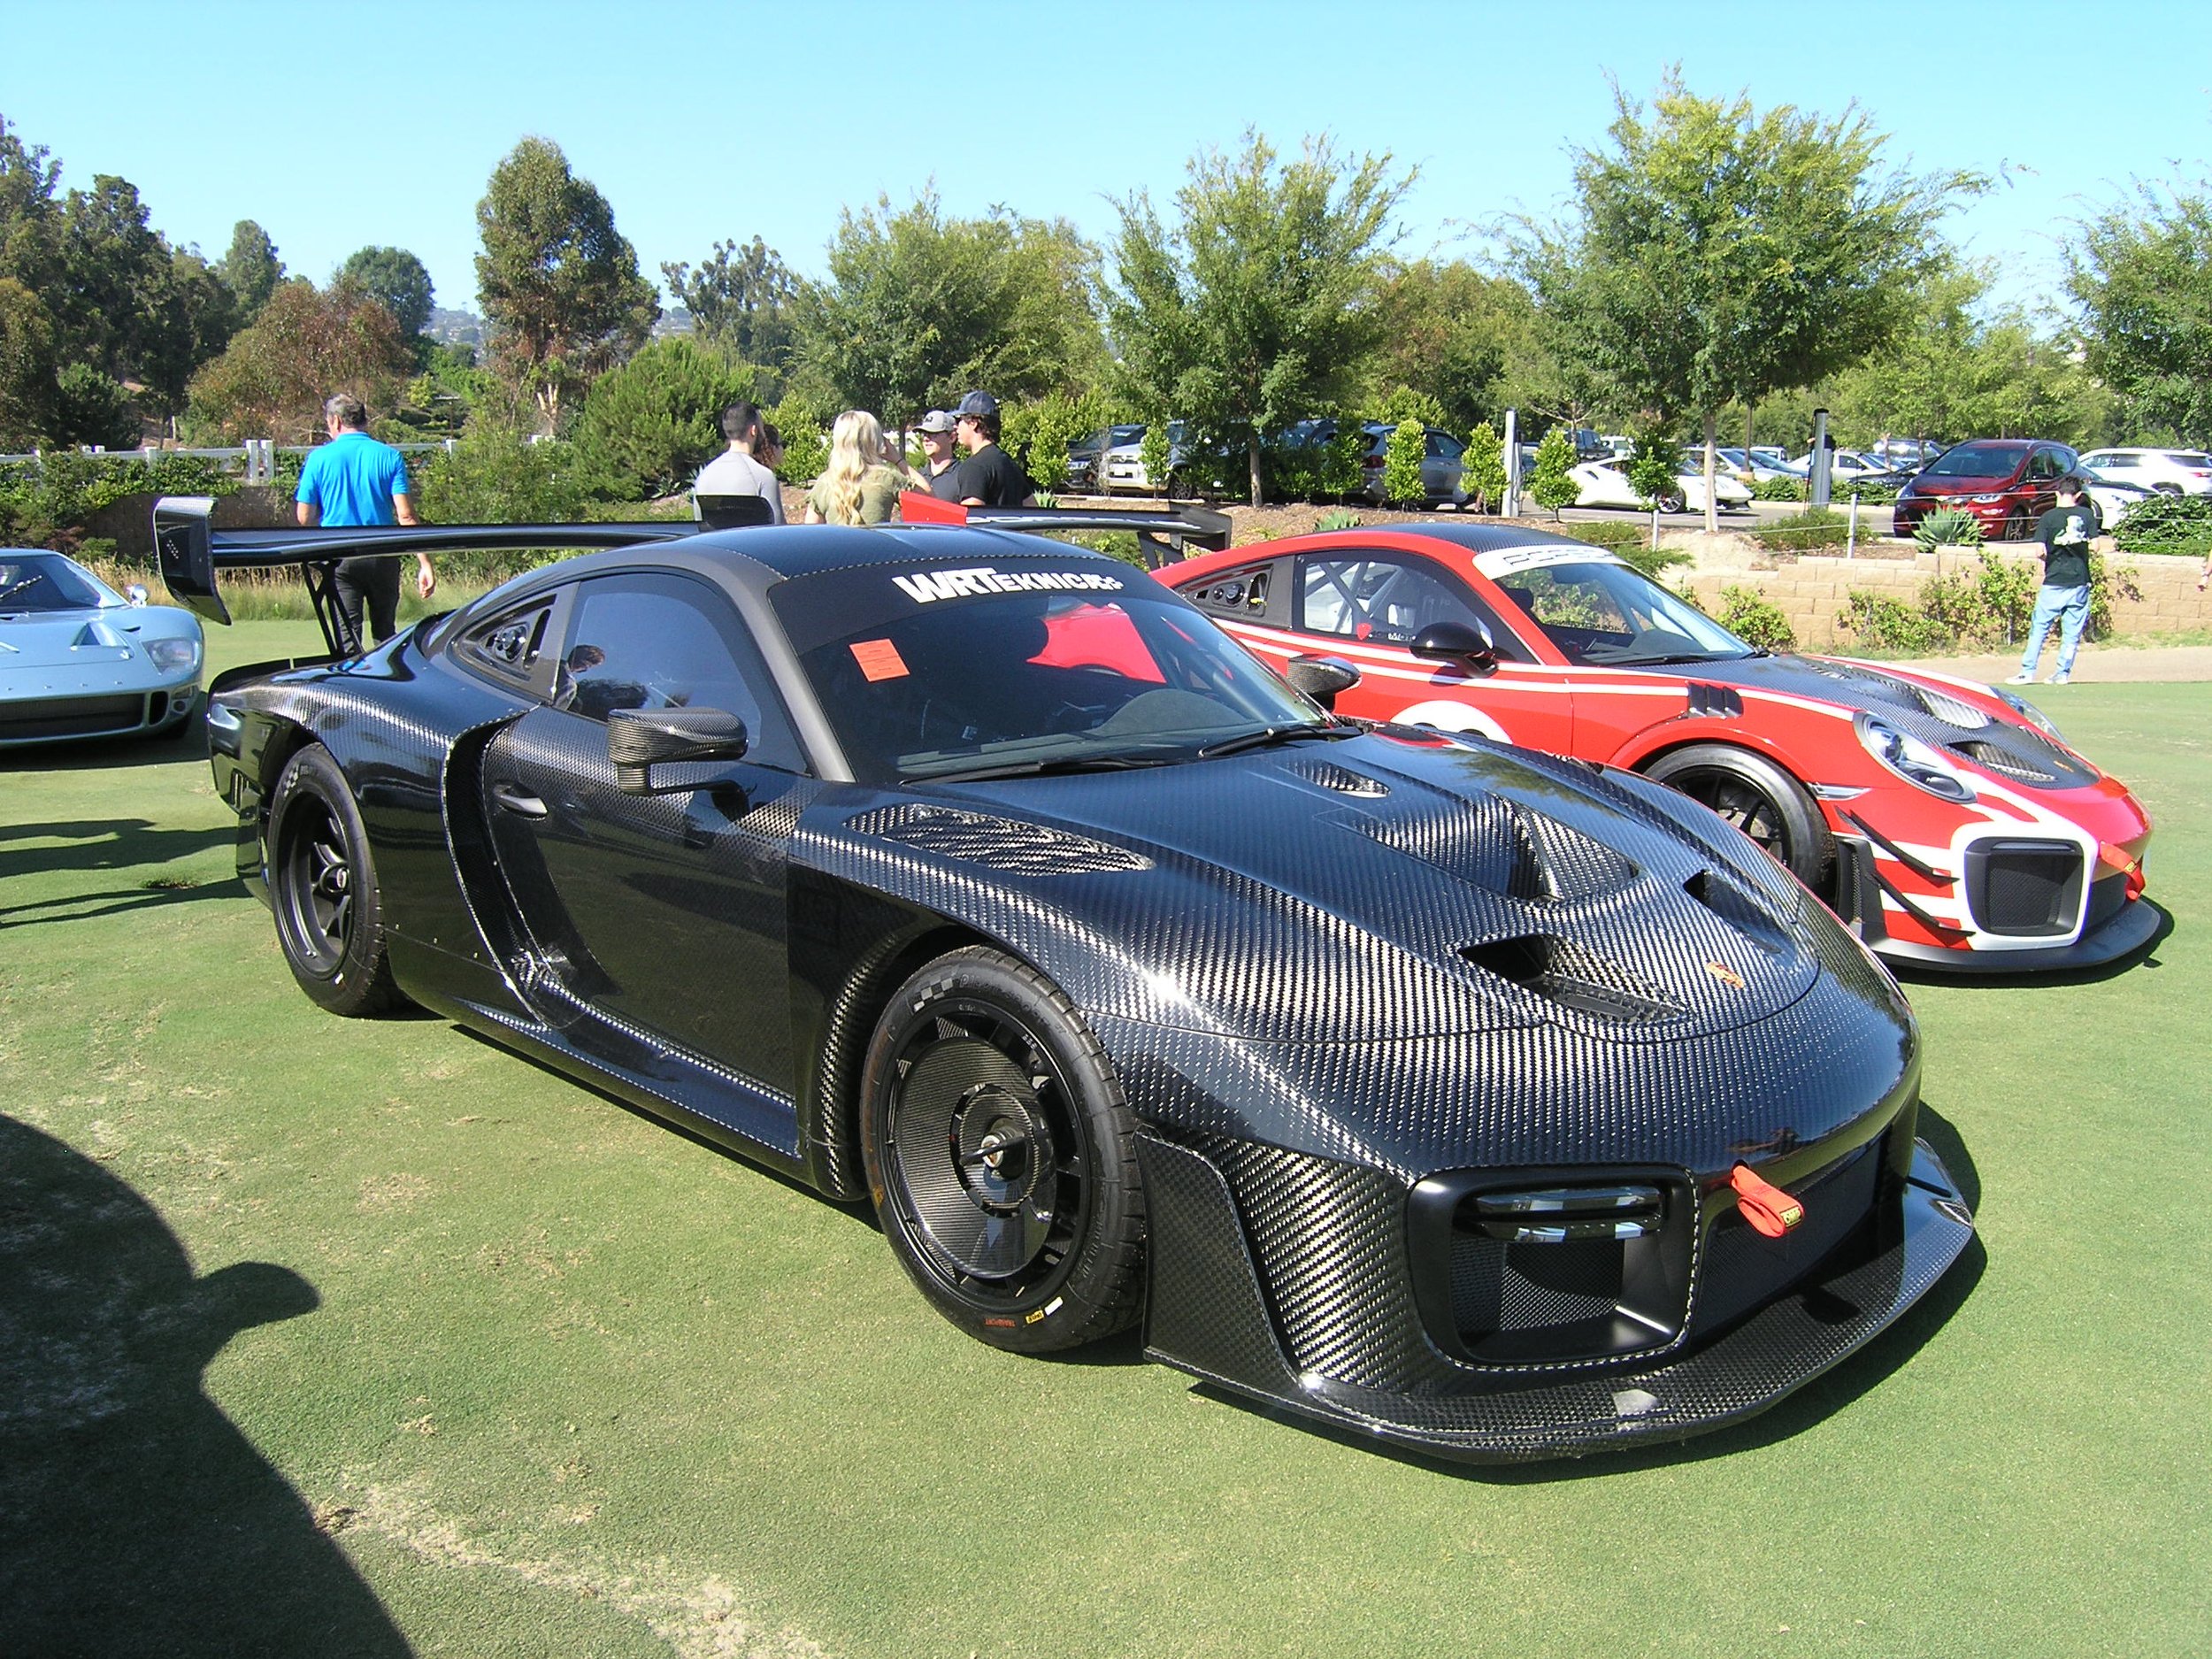 An example of carbon fiber body panels